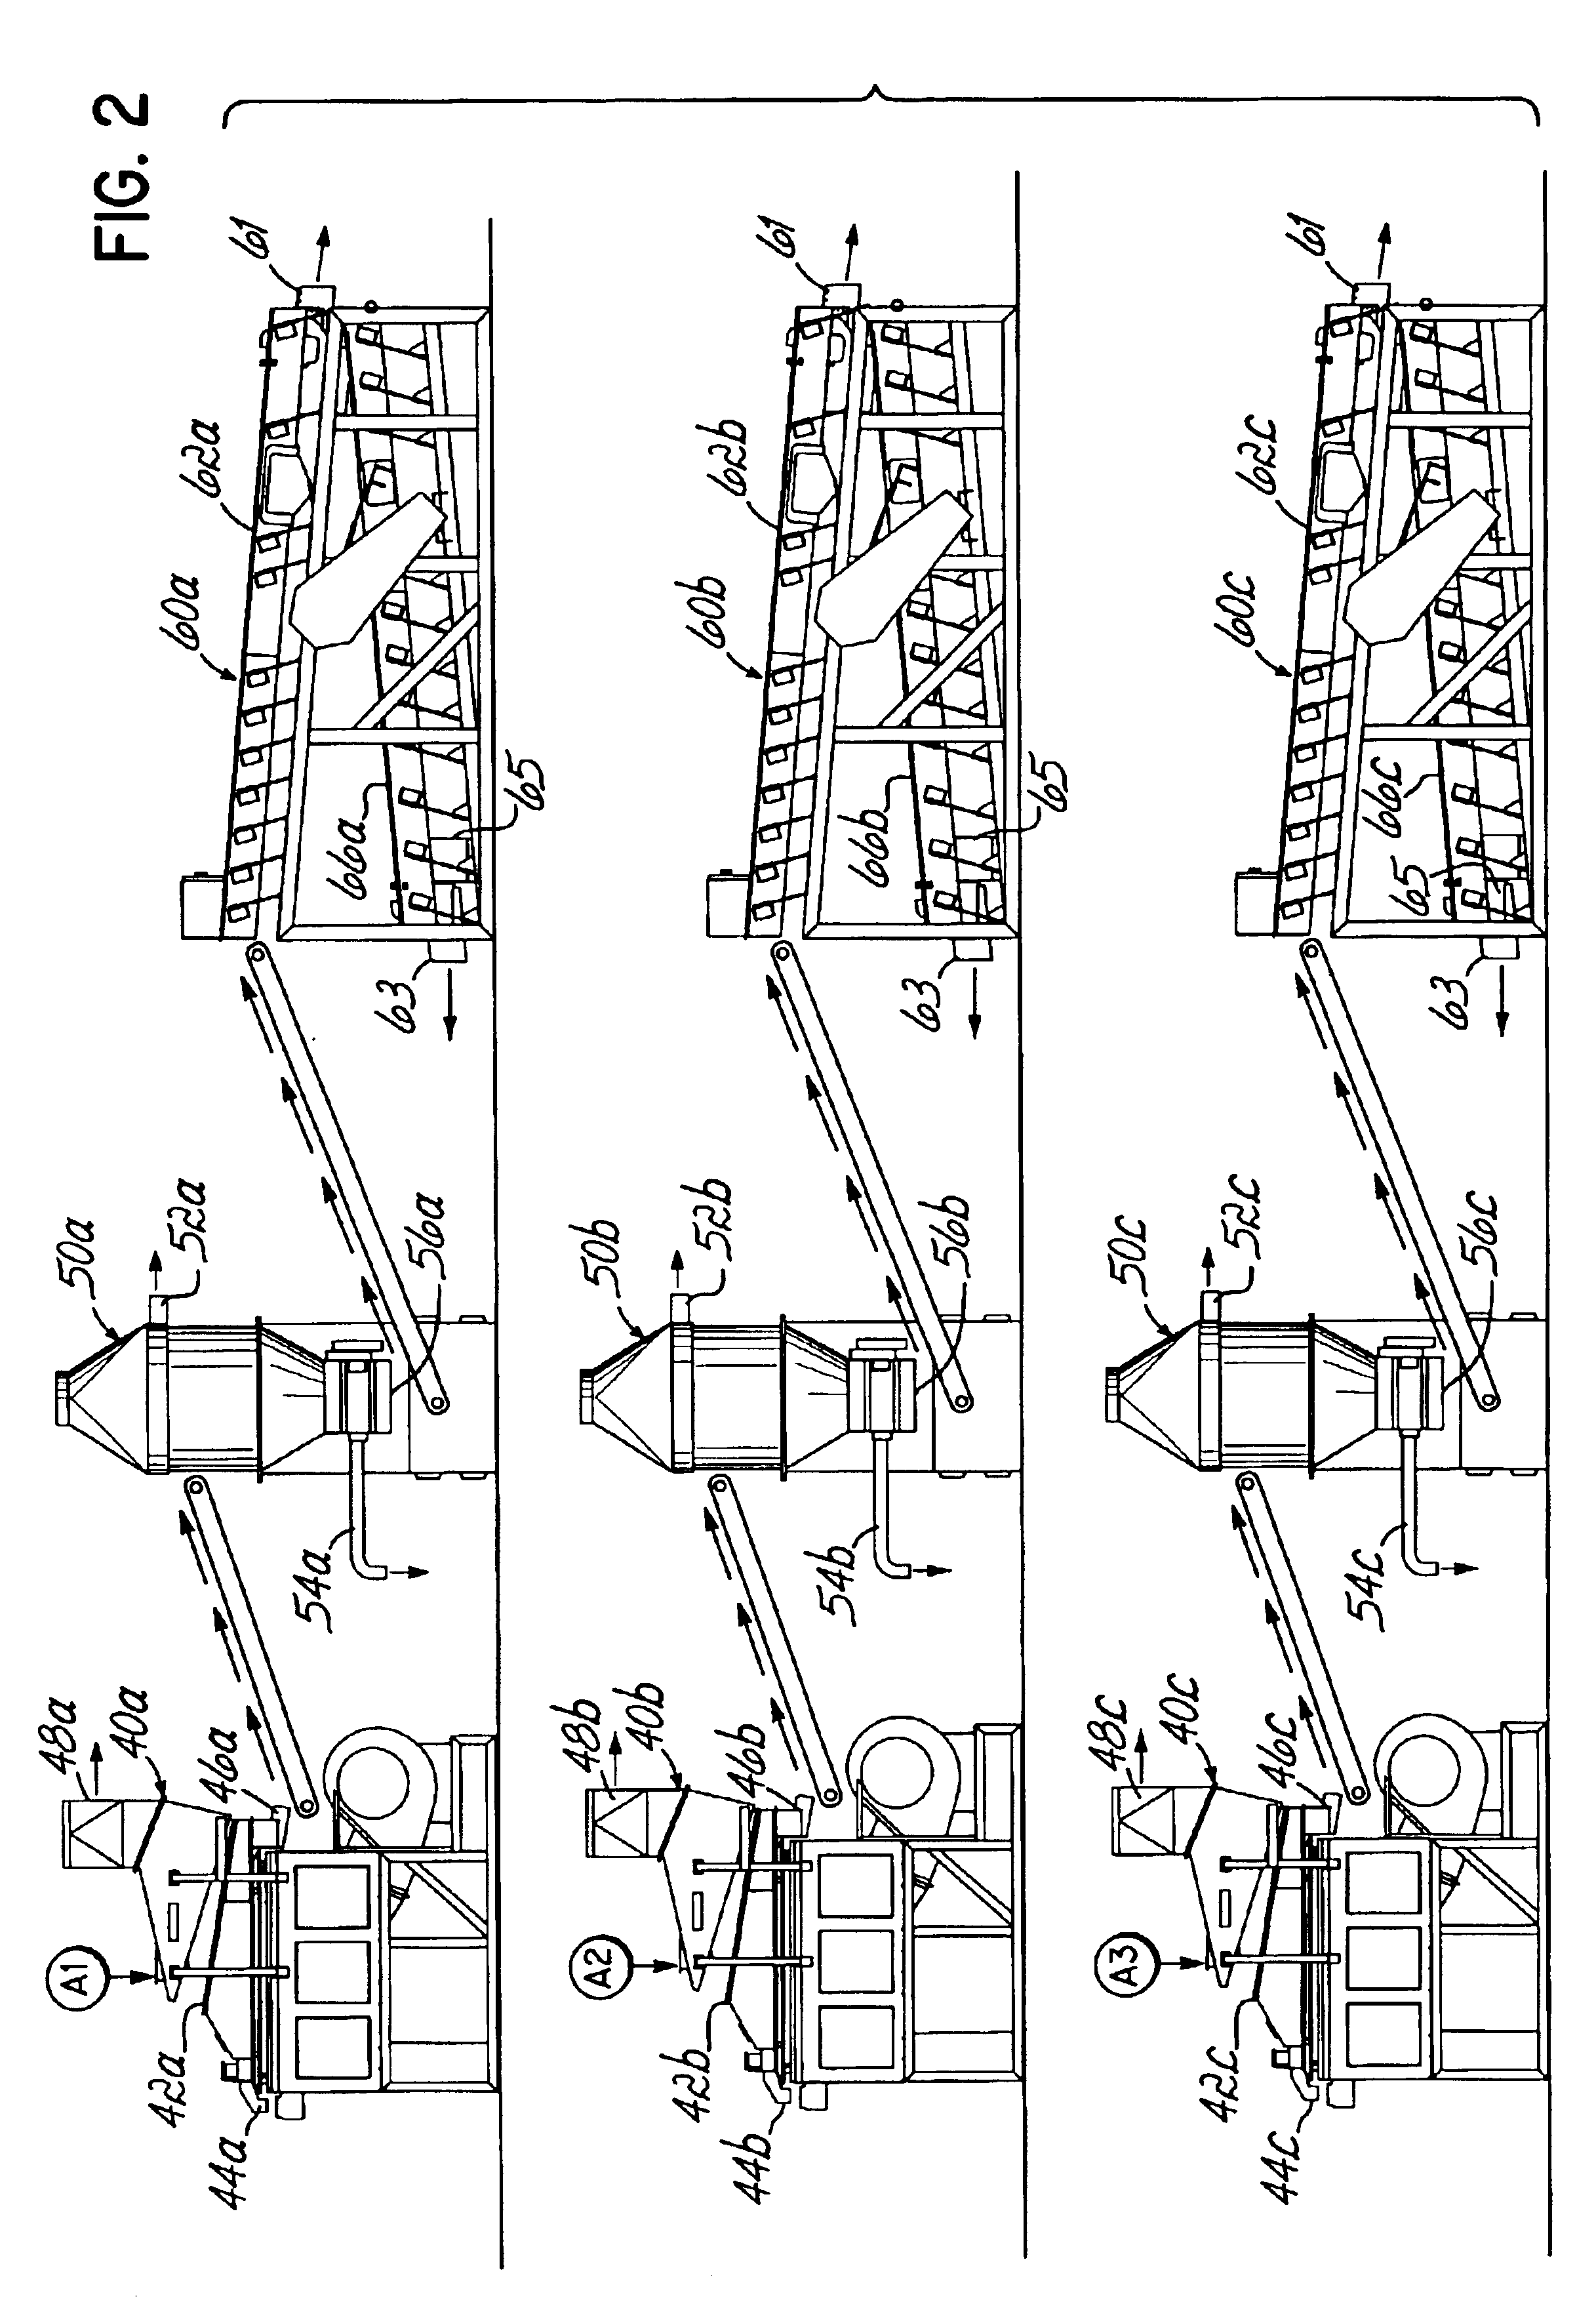 Apparatus and method for dry beneficiation of coal